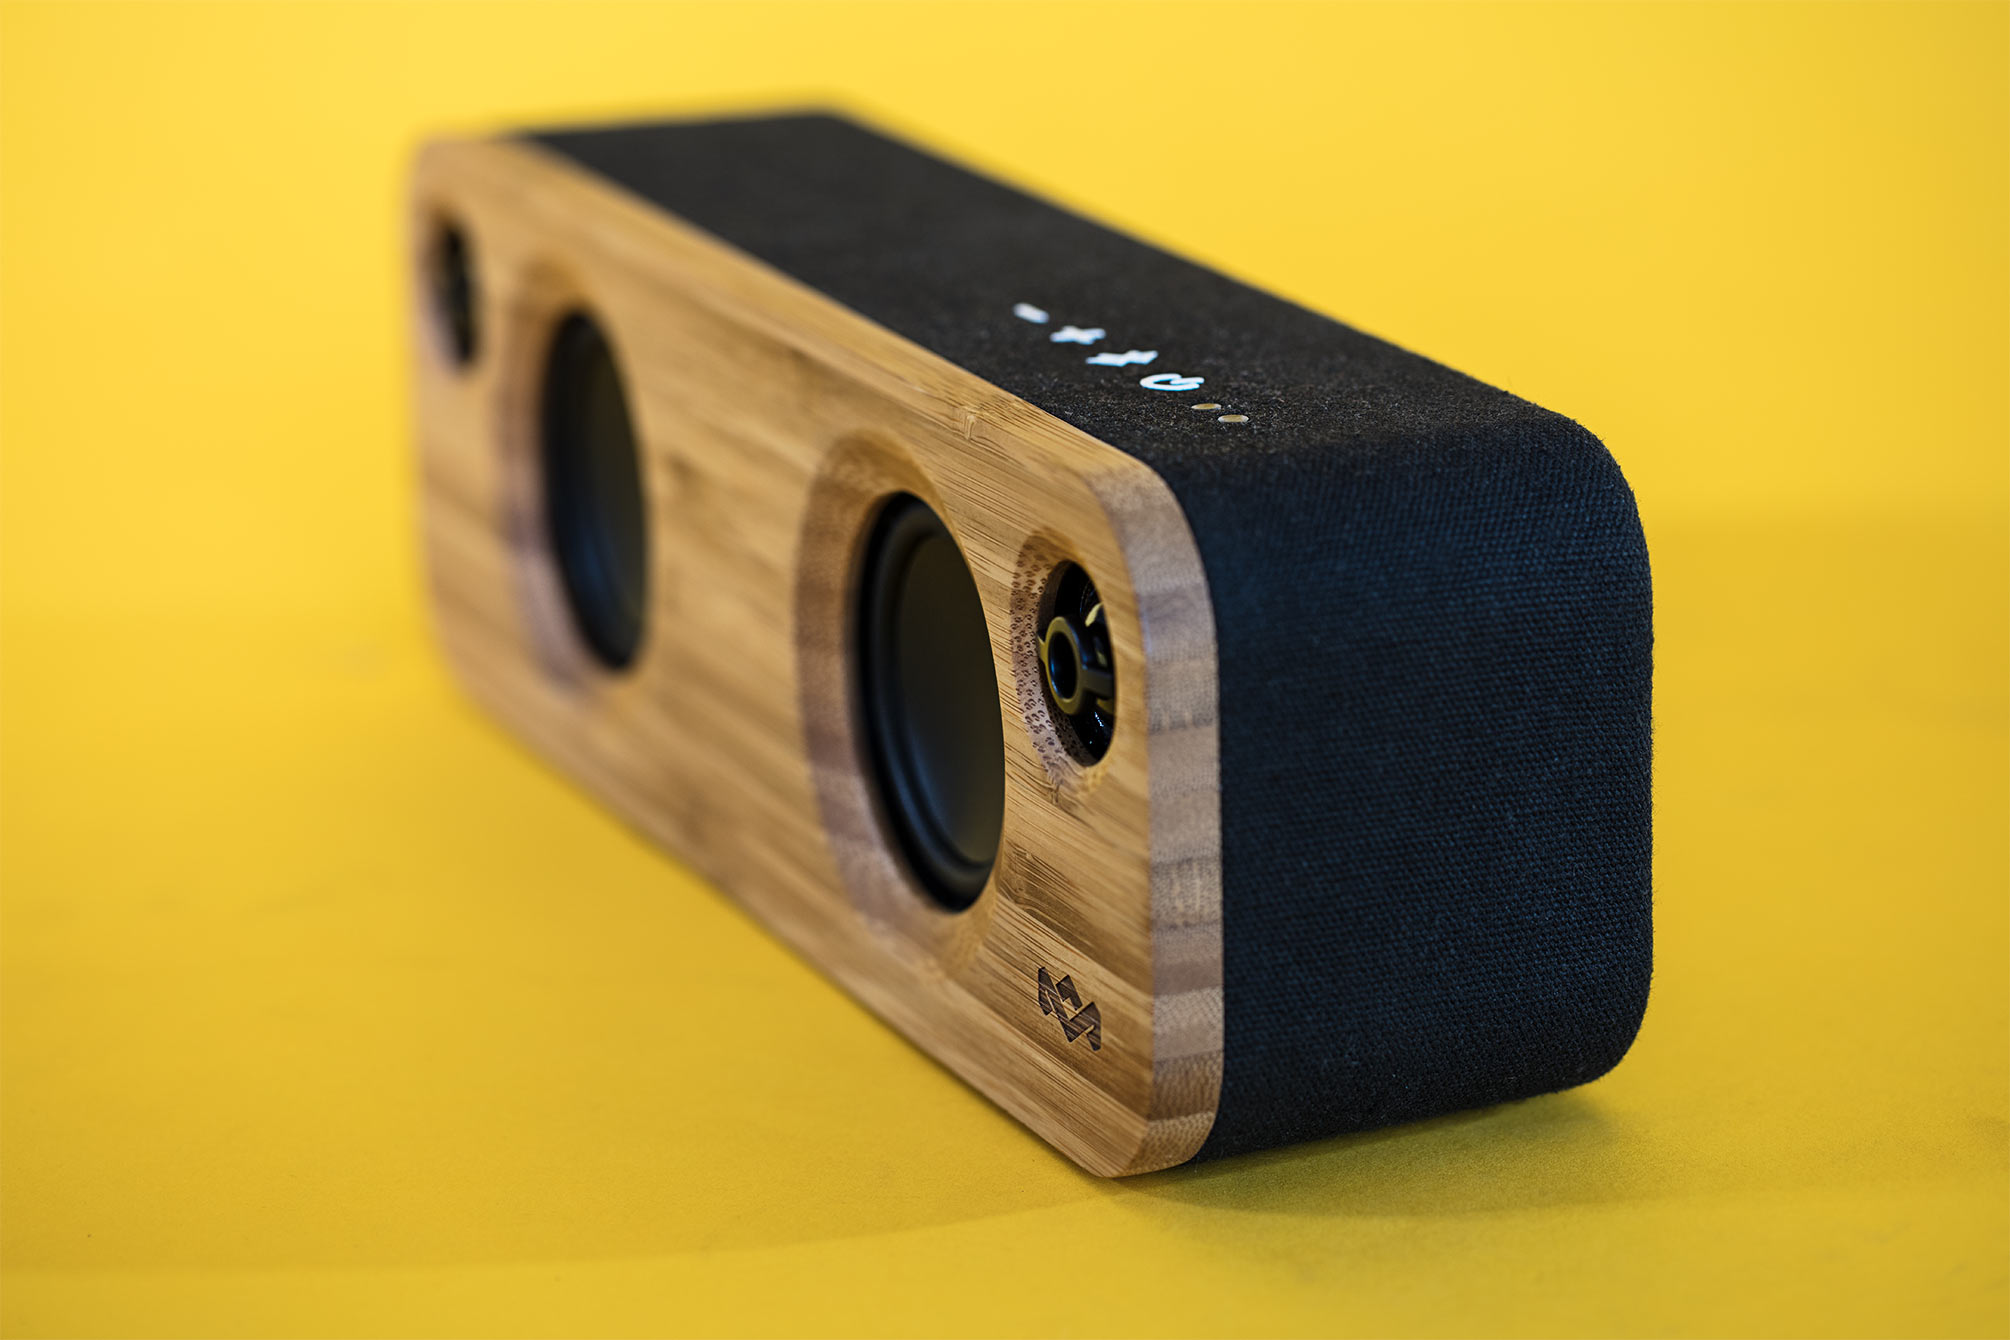 House of Marley Bluetooth Speaker Review